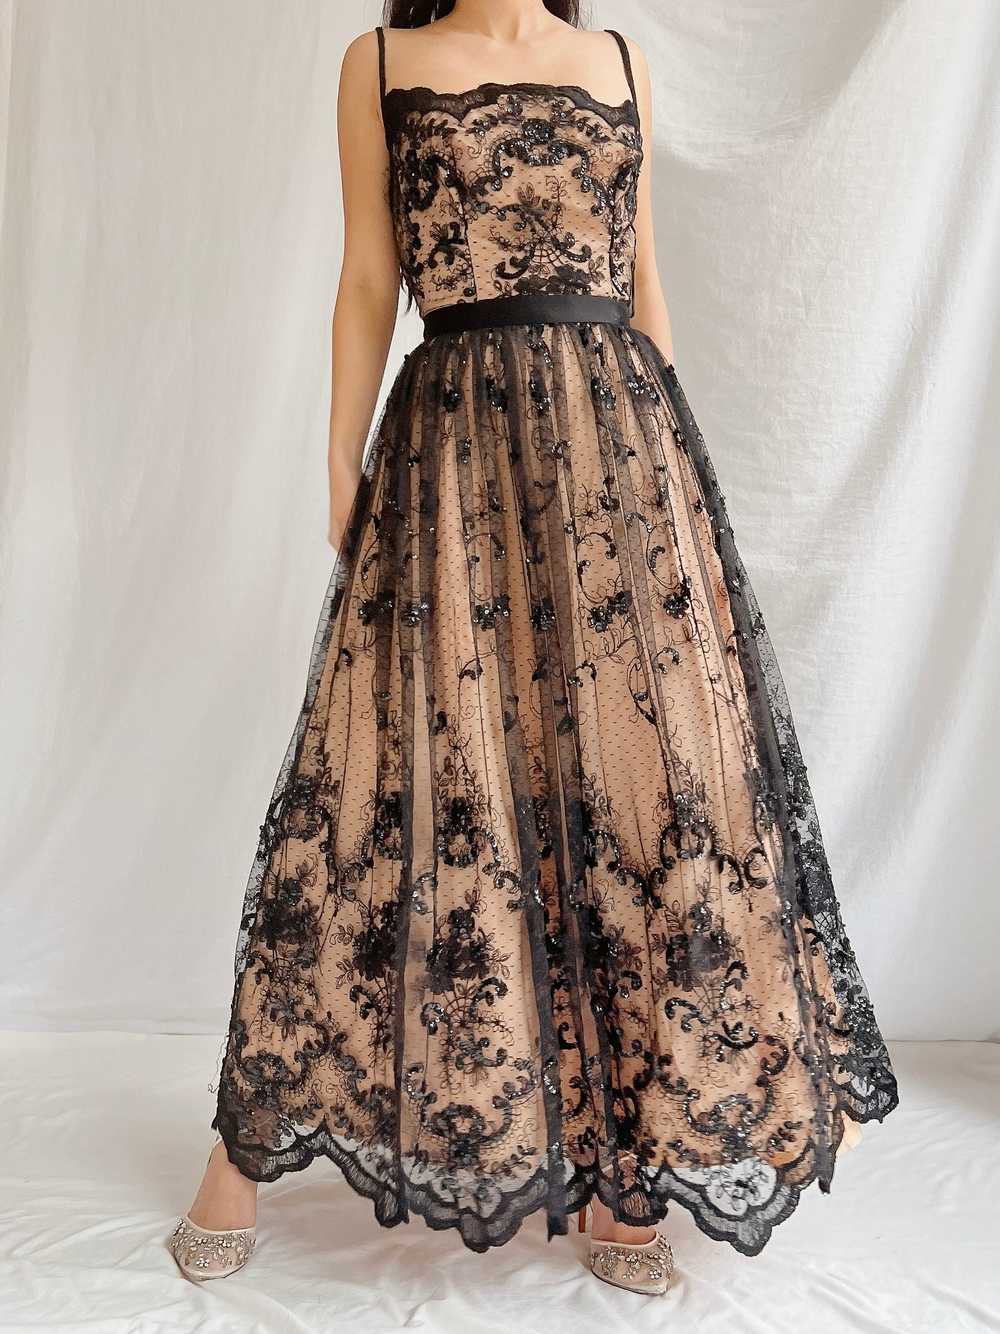 Vintage Nude and Black Lace Dress - S - image 7